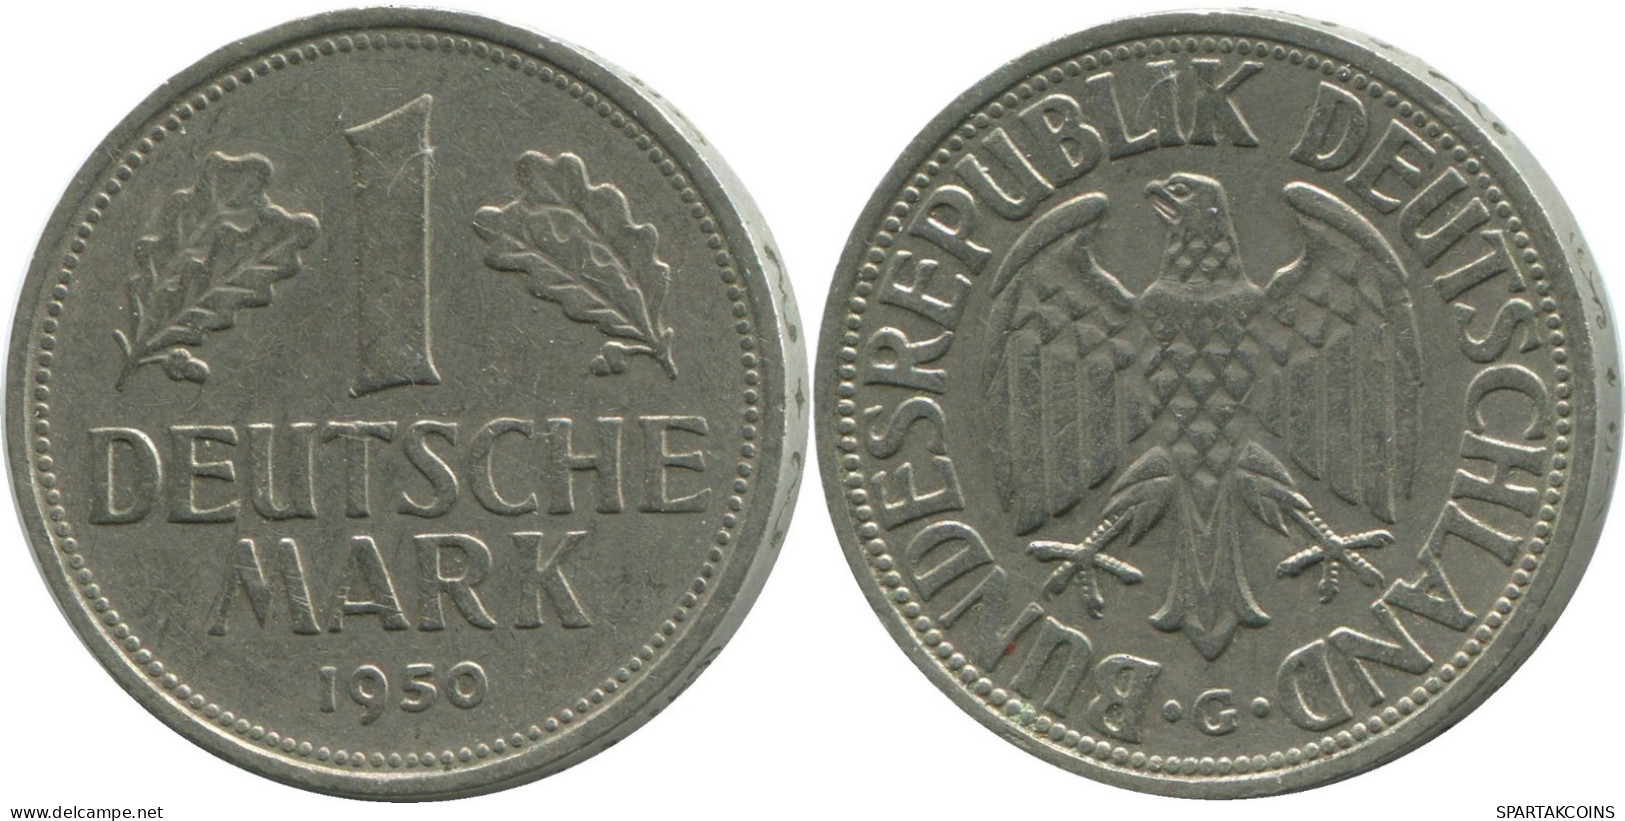 1 MARK 1950 G WEST & UNIFIED GERMANY Coin #DE10399.5.U.A - 1 Marco